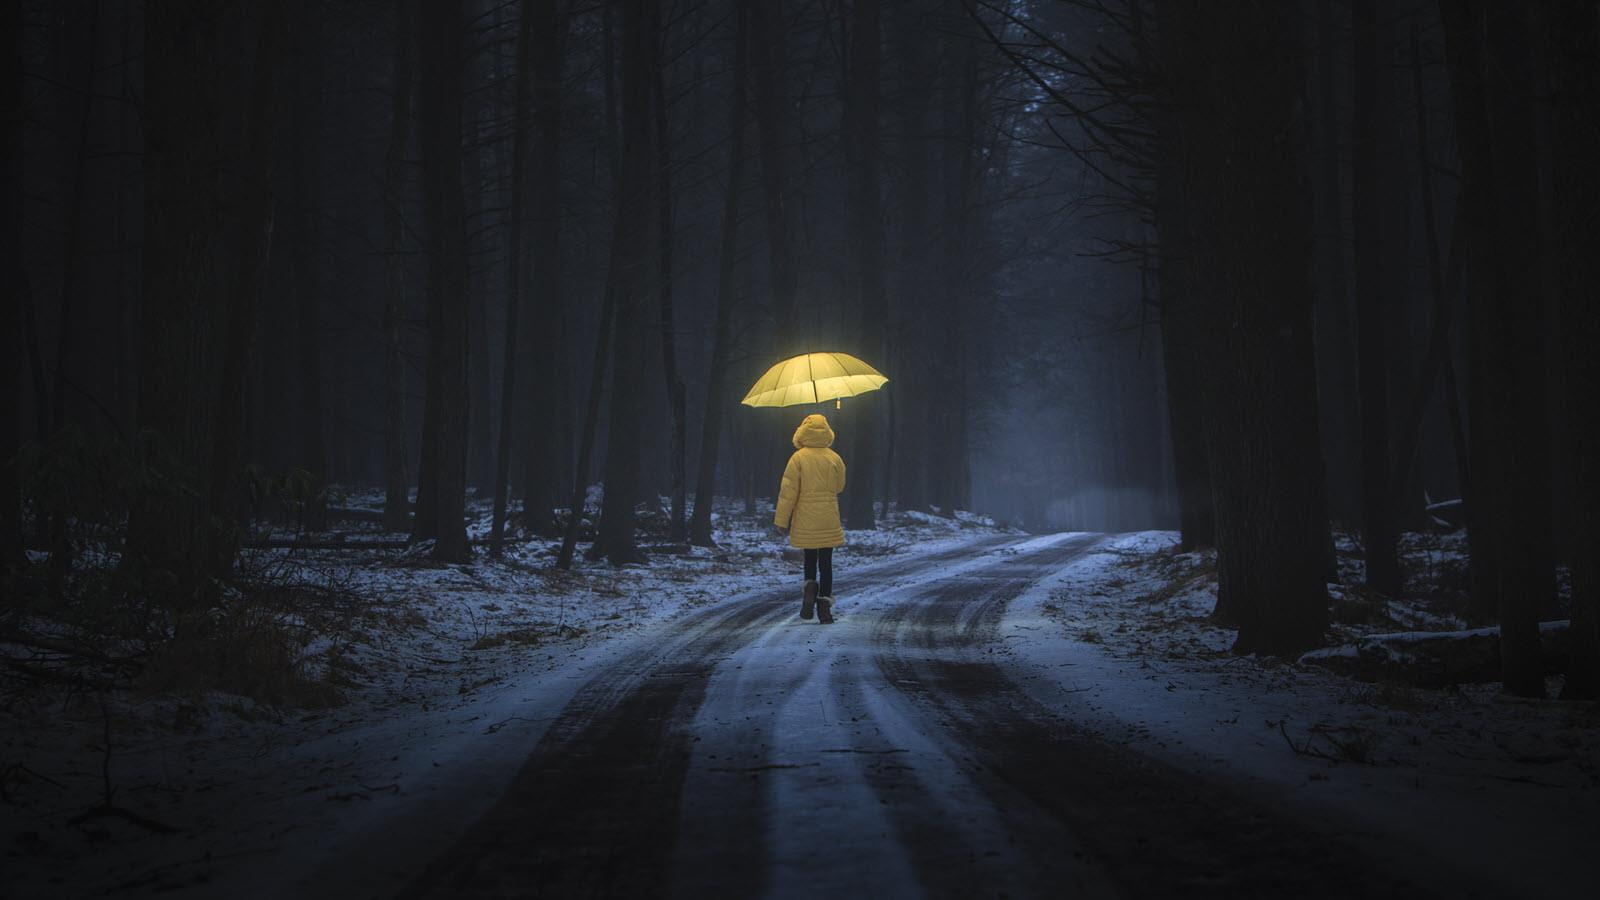 Person walks on a snowy path in the woods dressed in a yellow raincoat and carrying a yellow umbrella